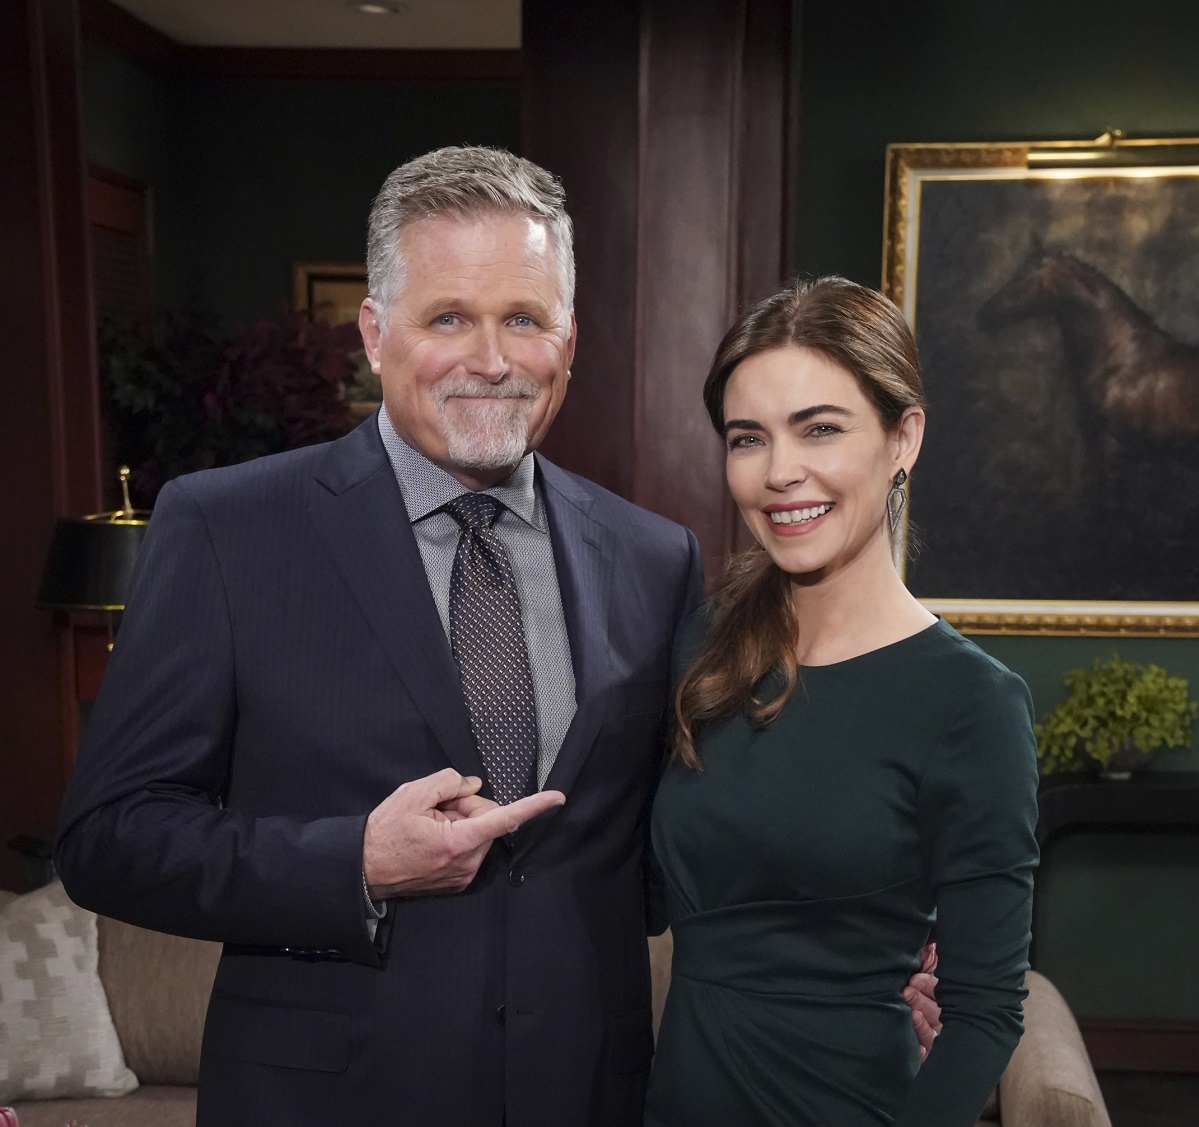 'The Young and the Restless' star Robert Newman in a blue suit, and Amelia Heinle in a green dress; posing together on set.